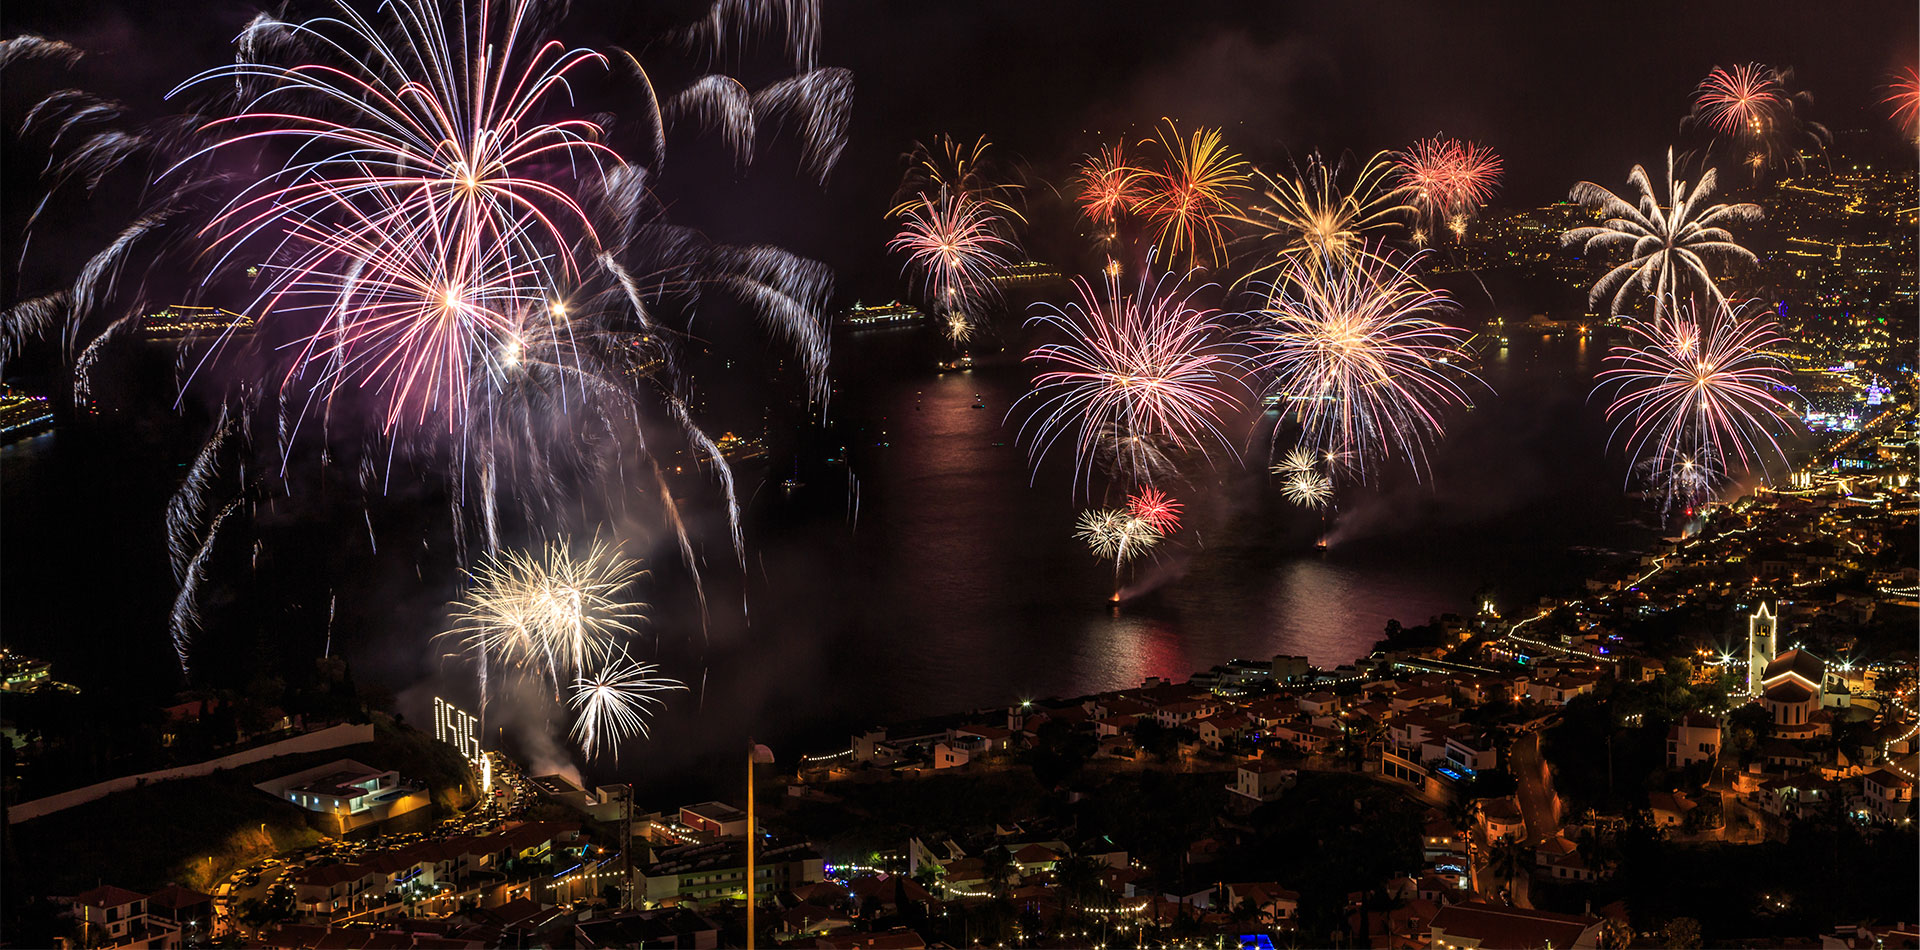 New Years eve fireworks over Funchal, Madeira